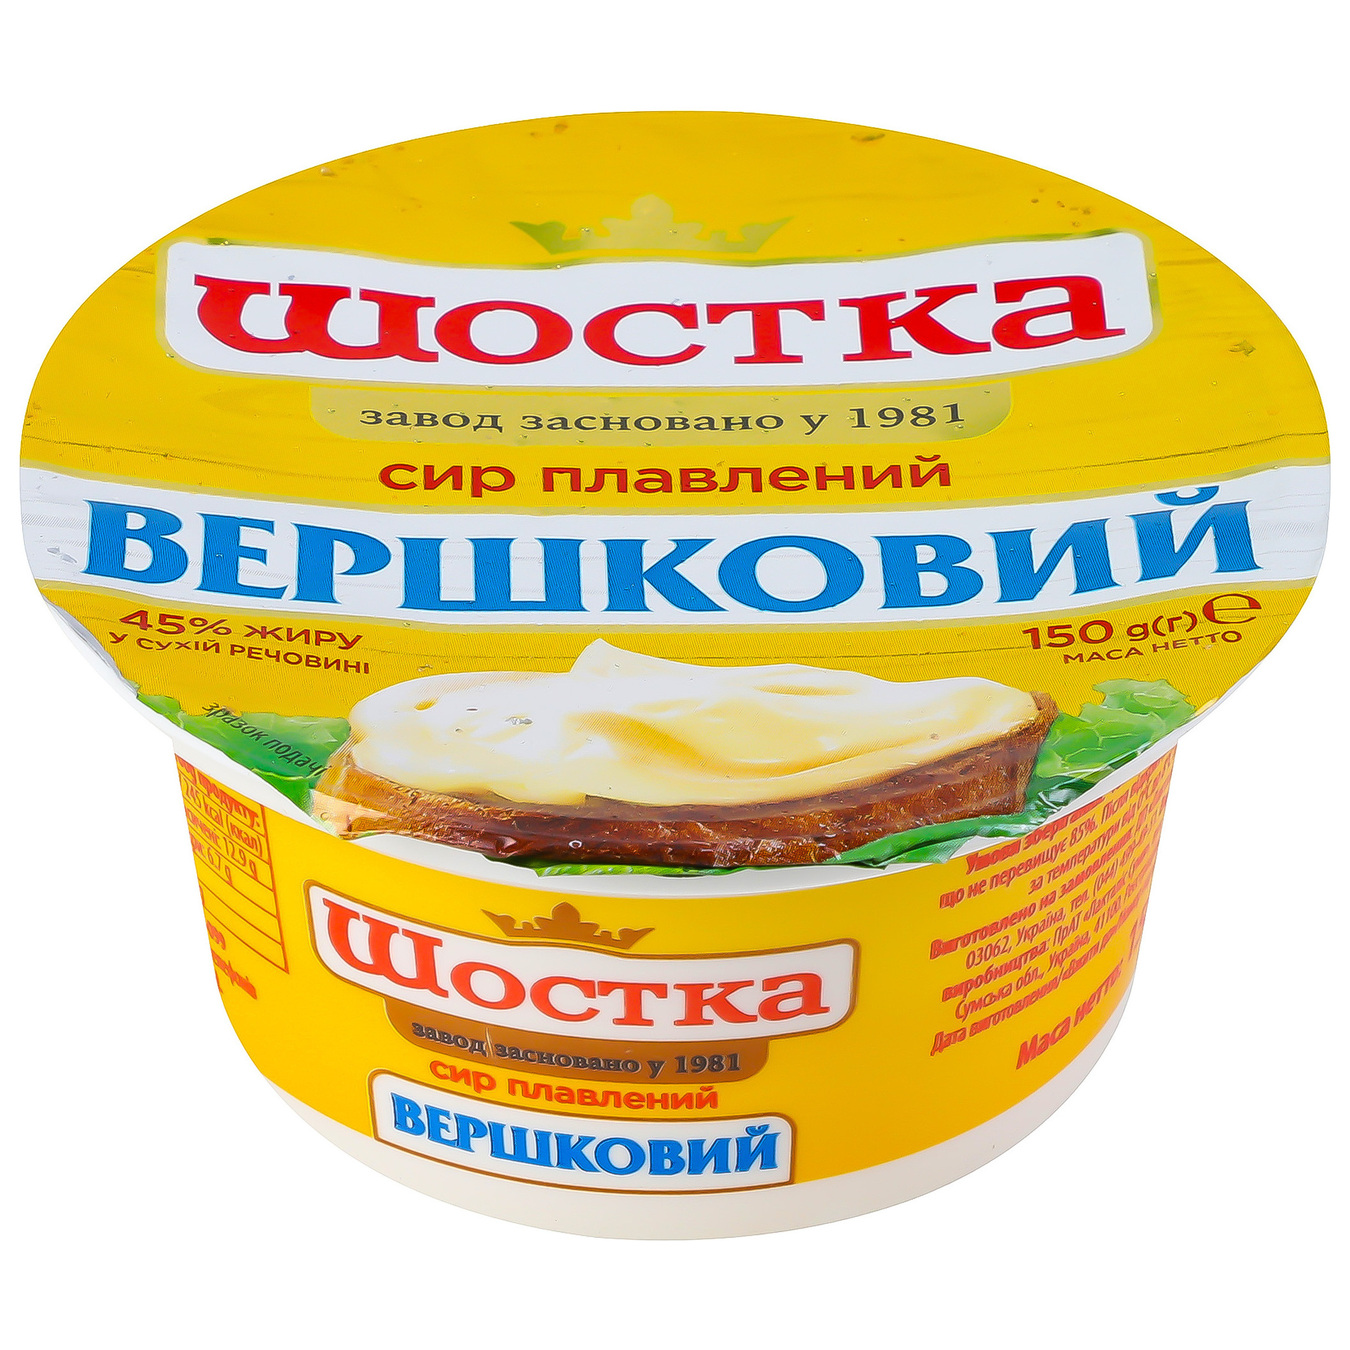 Shostka melted cream cheese 45% 150g